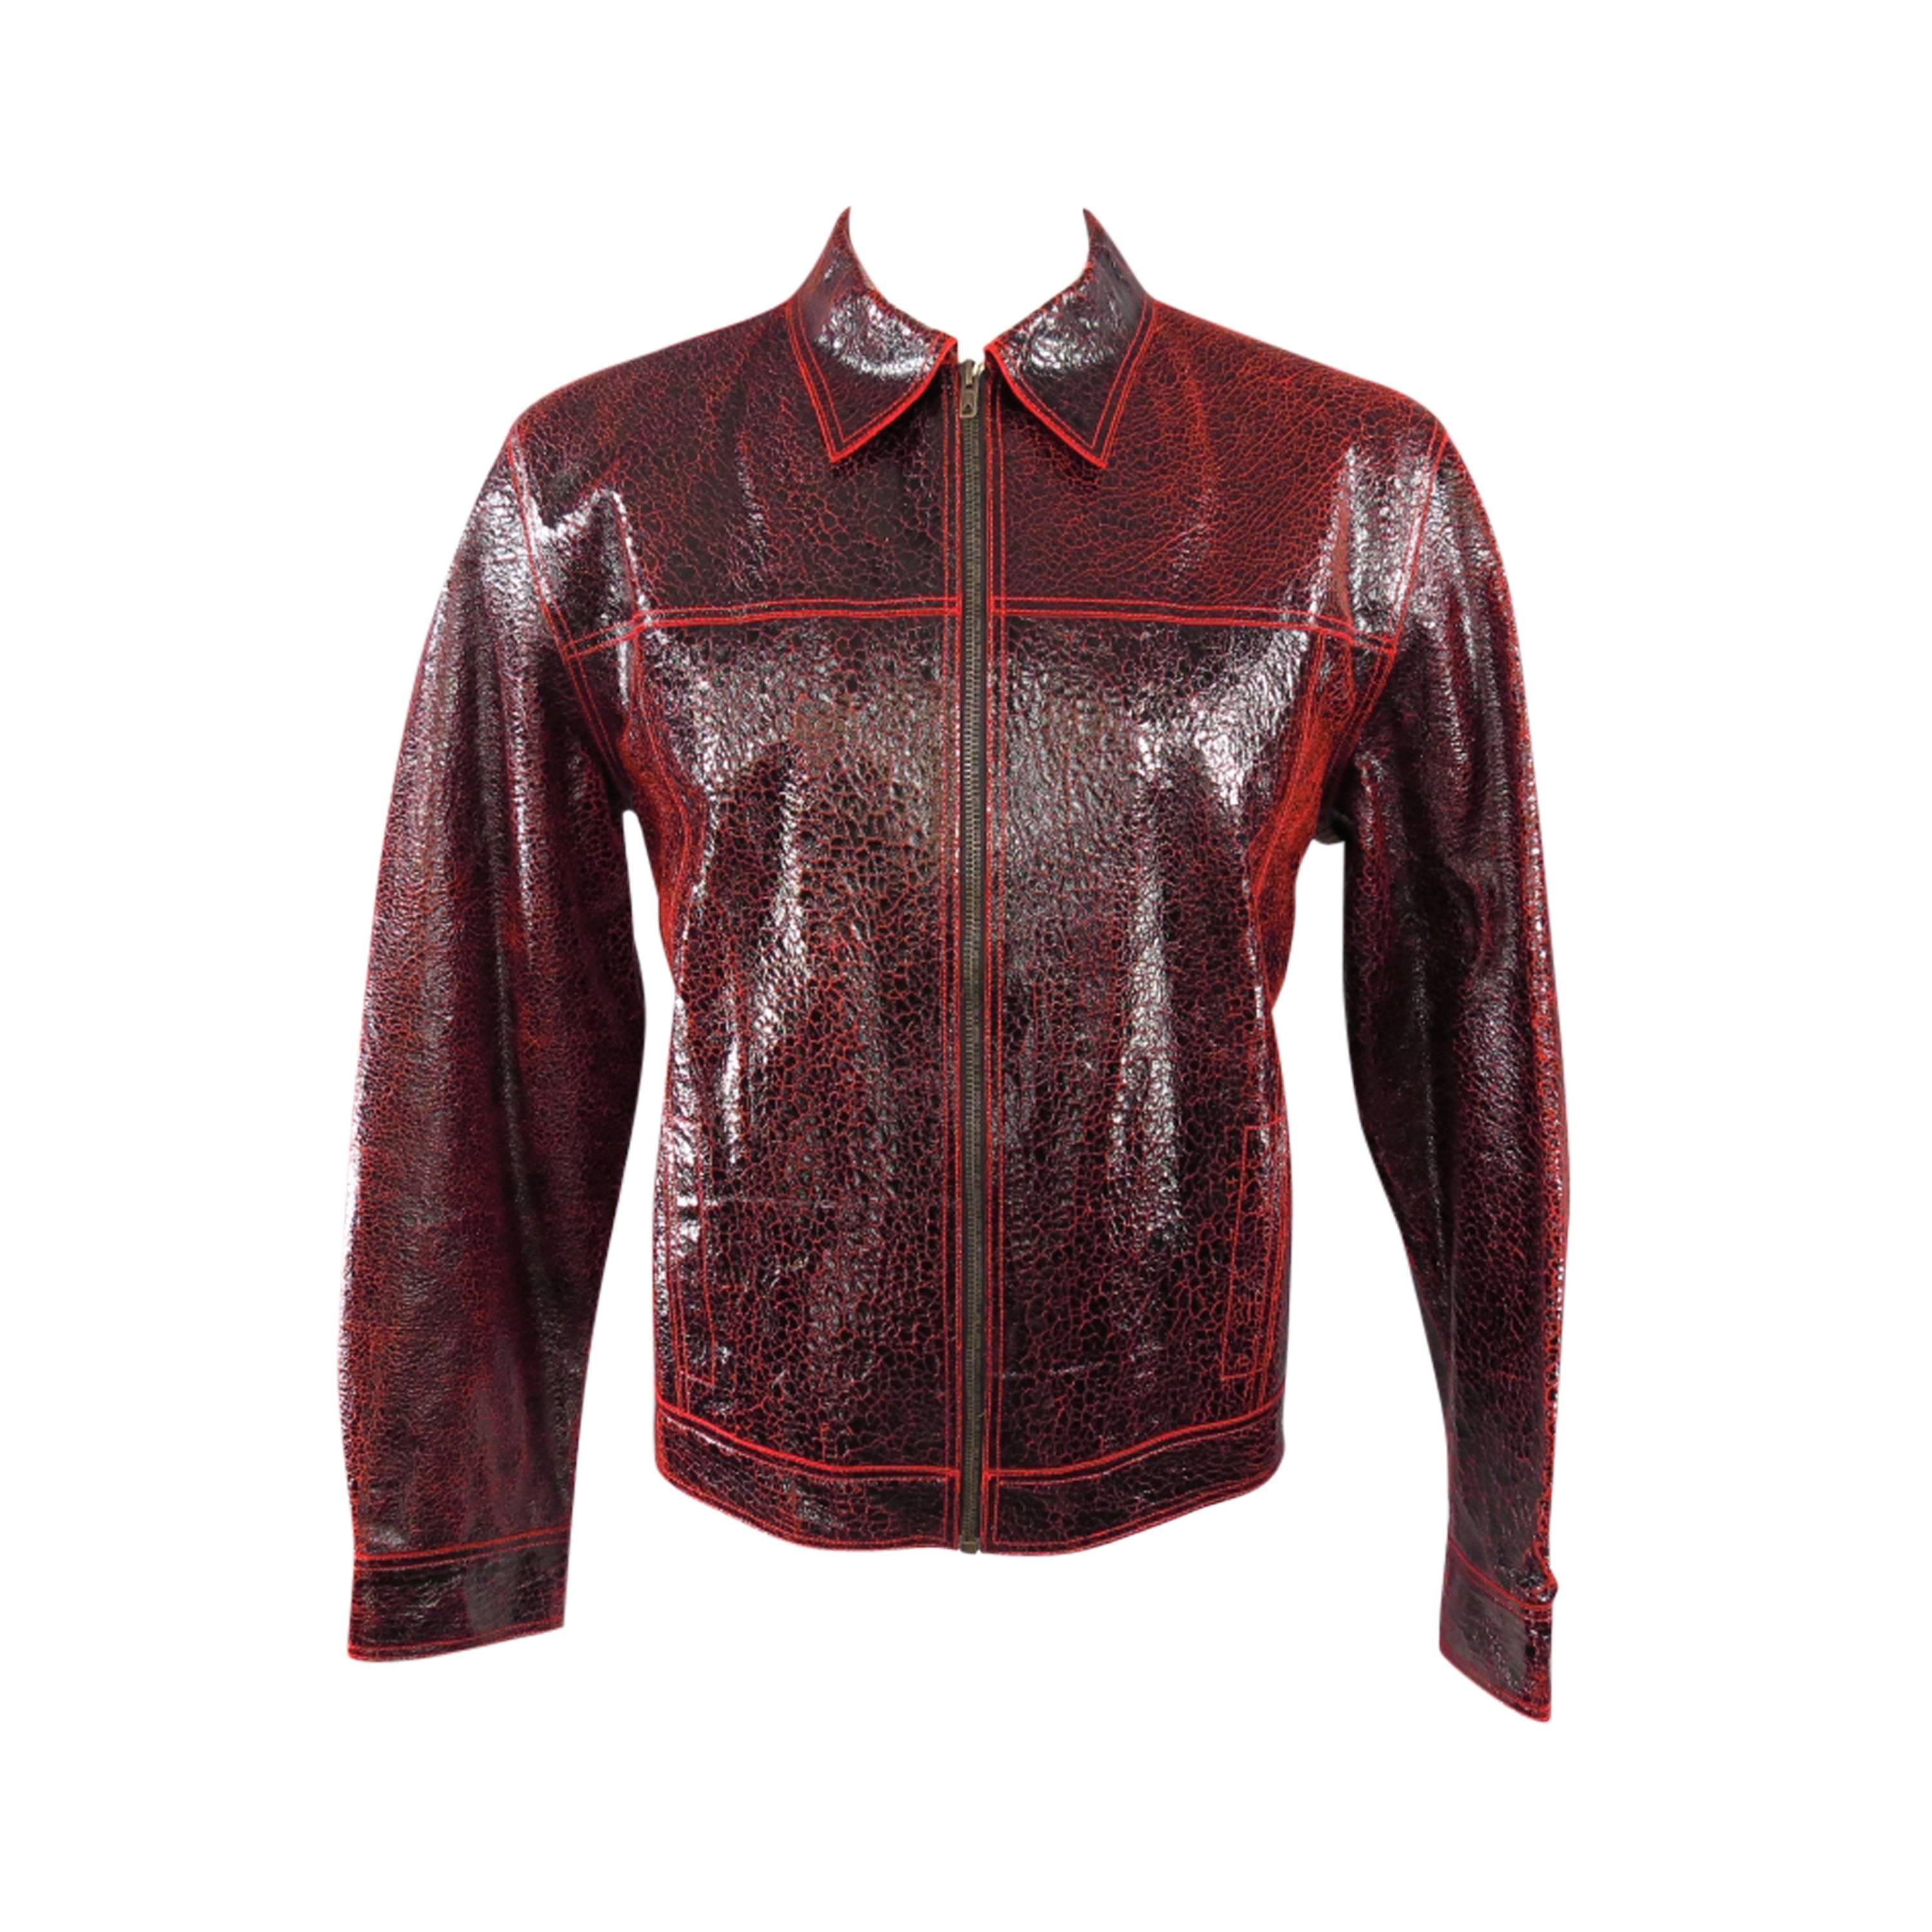 New ROBERTO CAVALLI Men's 44 Leather Black & Red Crackle Leather Jacket